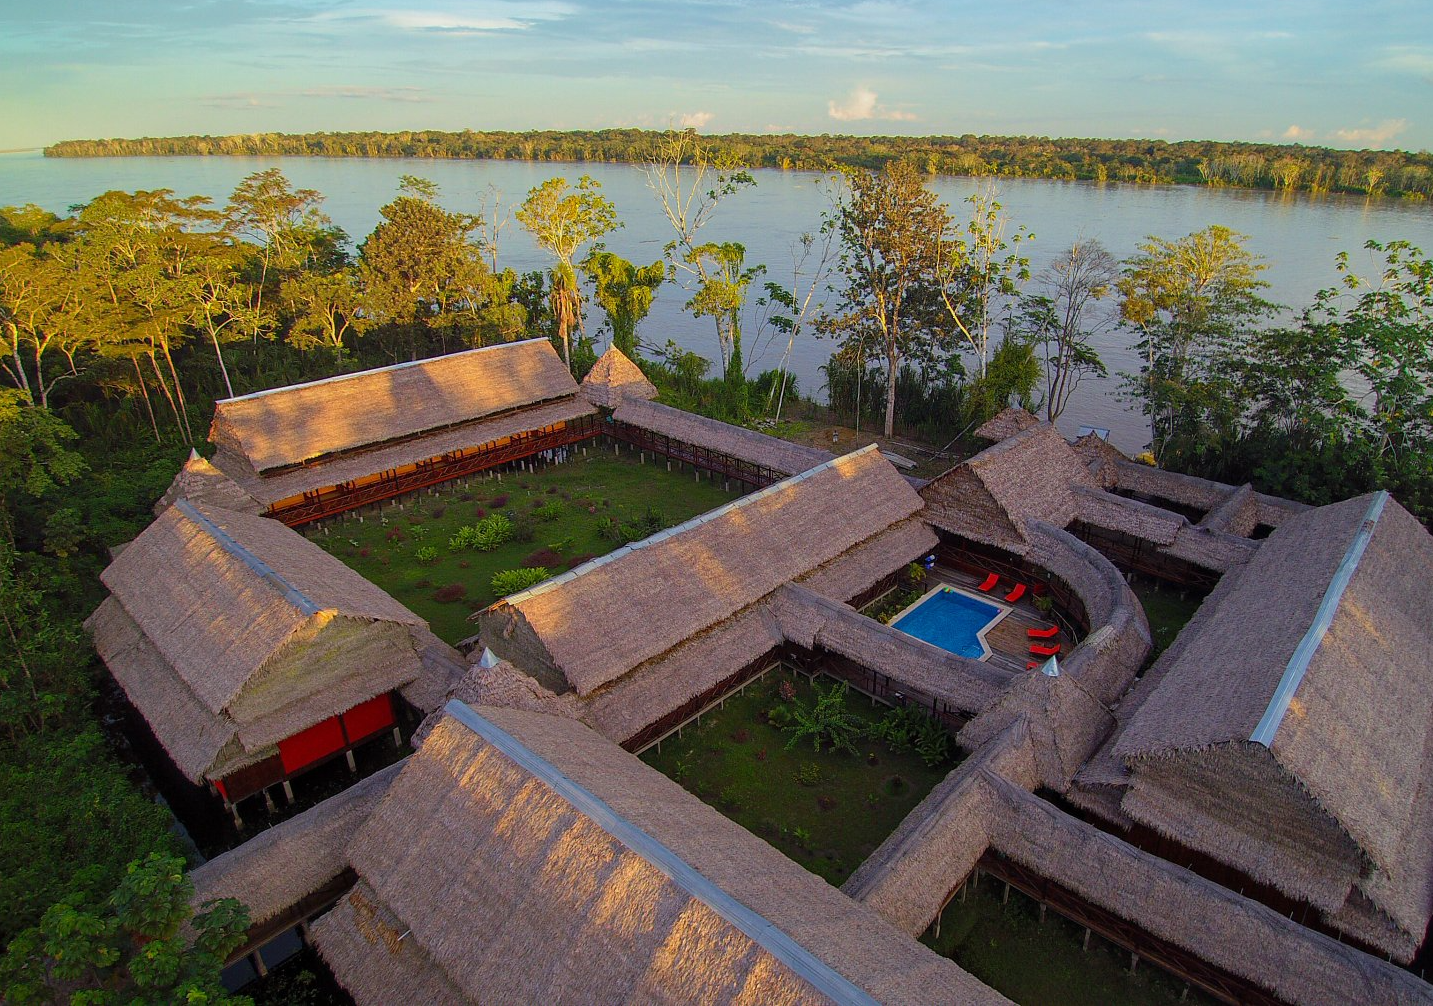 Heliconia Lodge in Iquitos